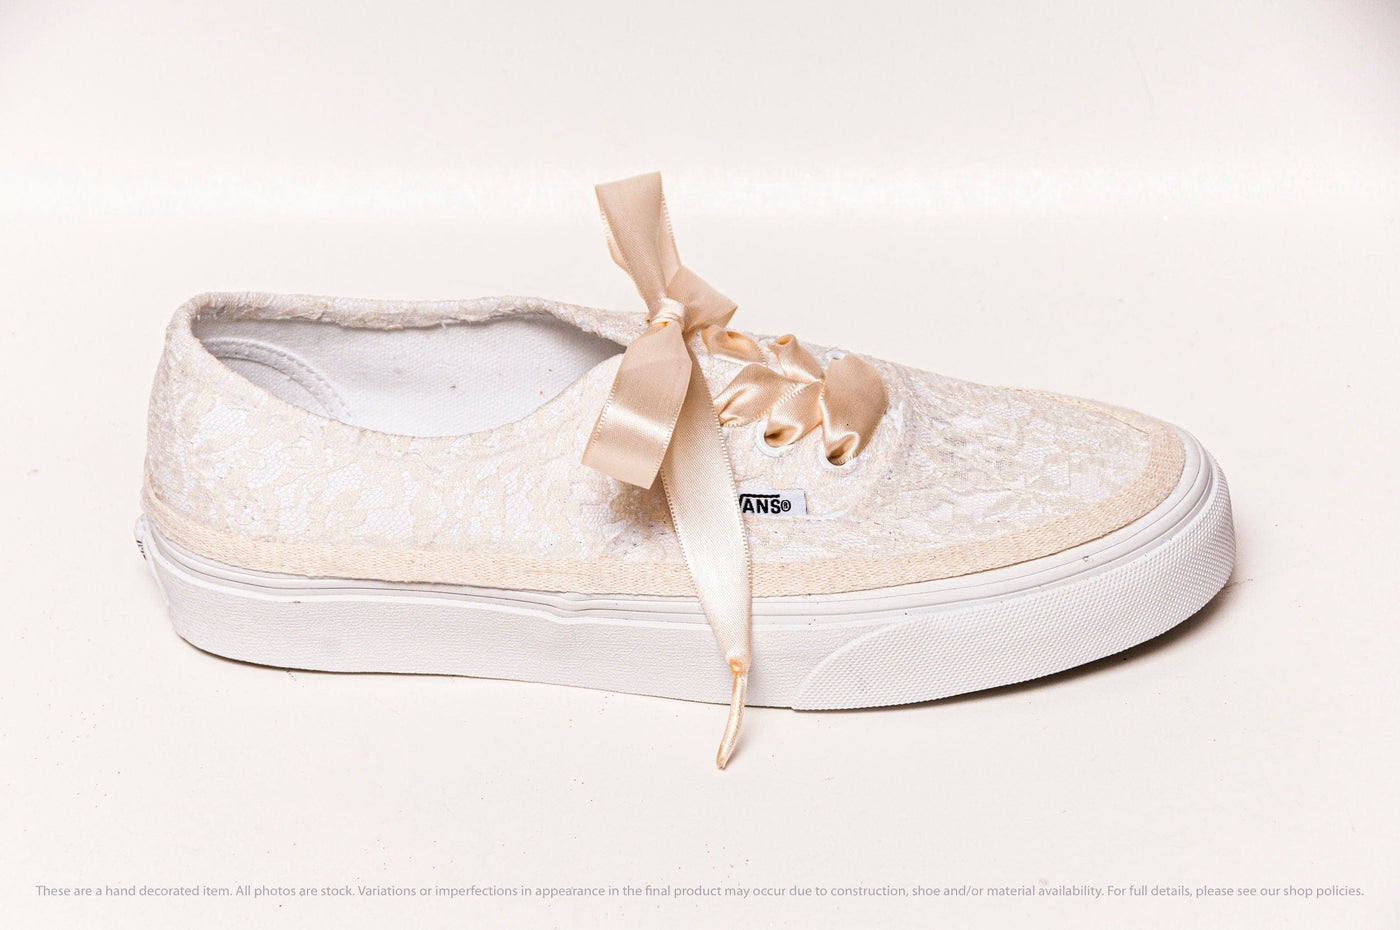 Ivory Lace Over White Sneakers With Platform And Slip On Options